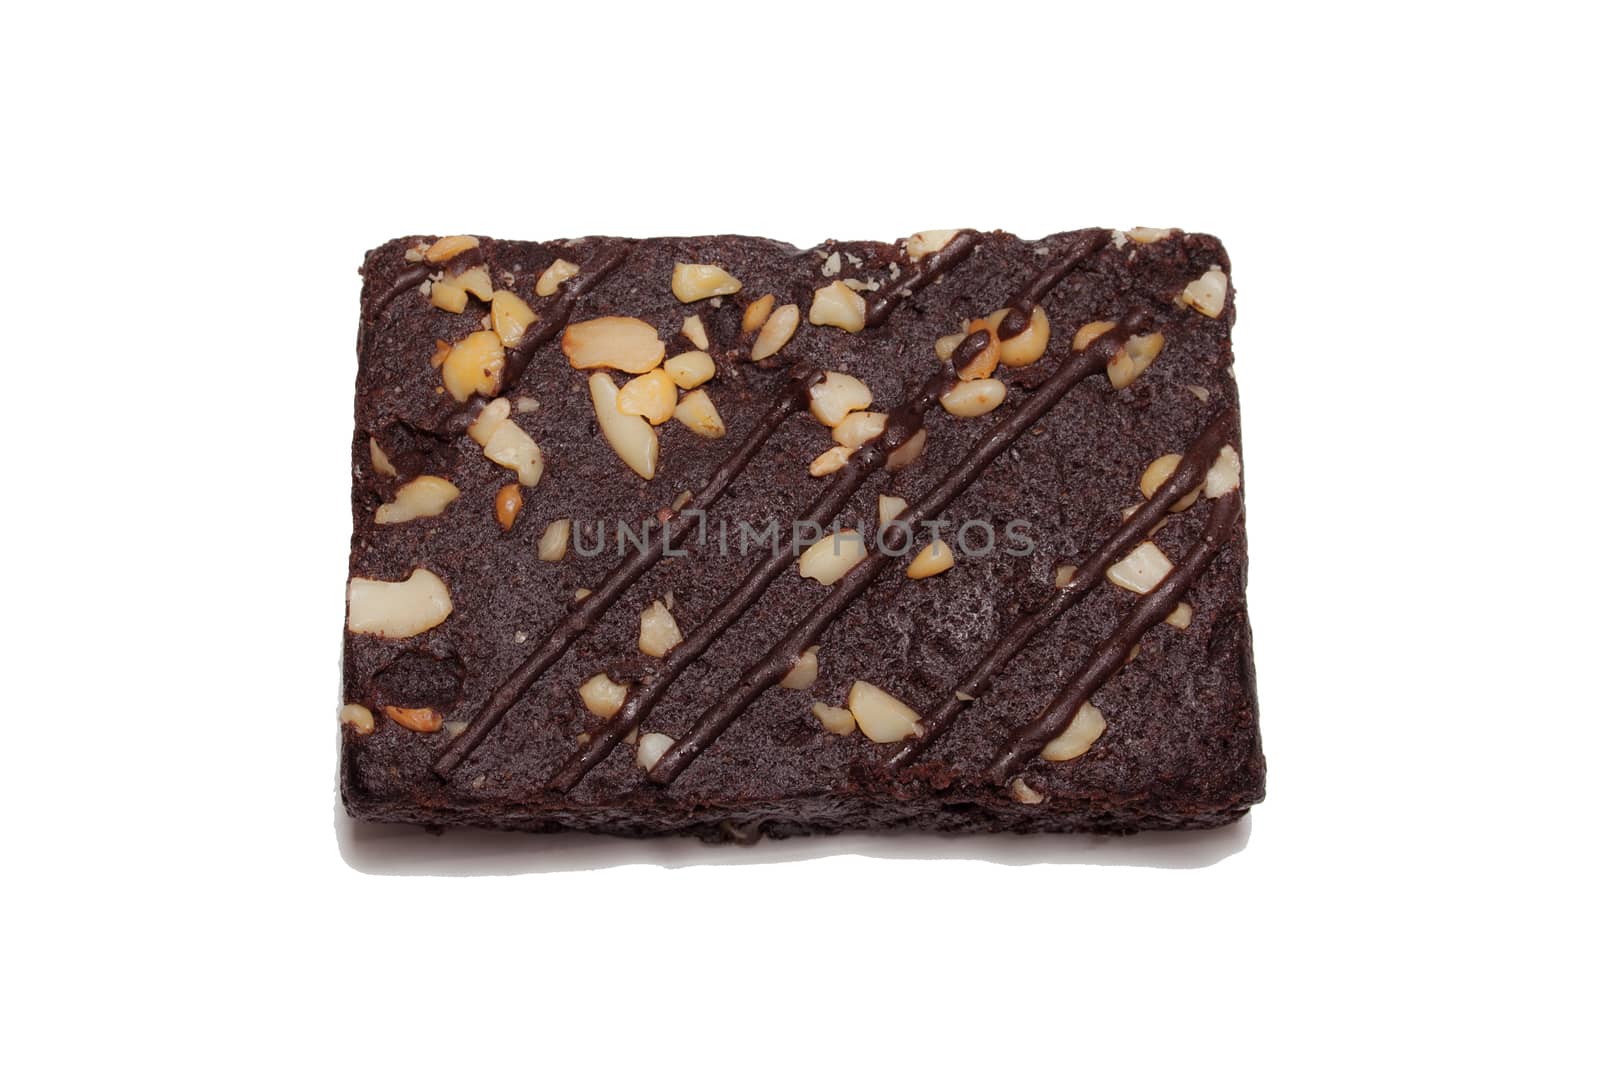 Healthy Chocolate walnut brownies on white background